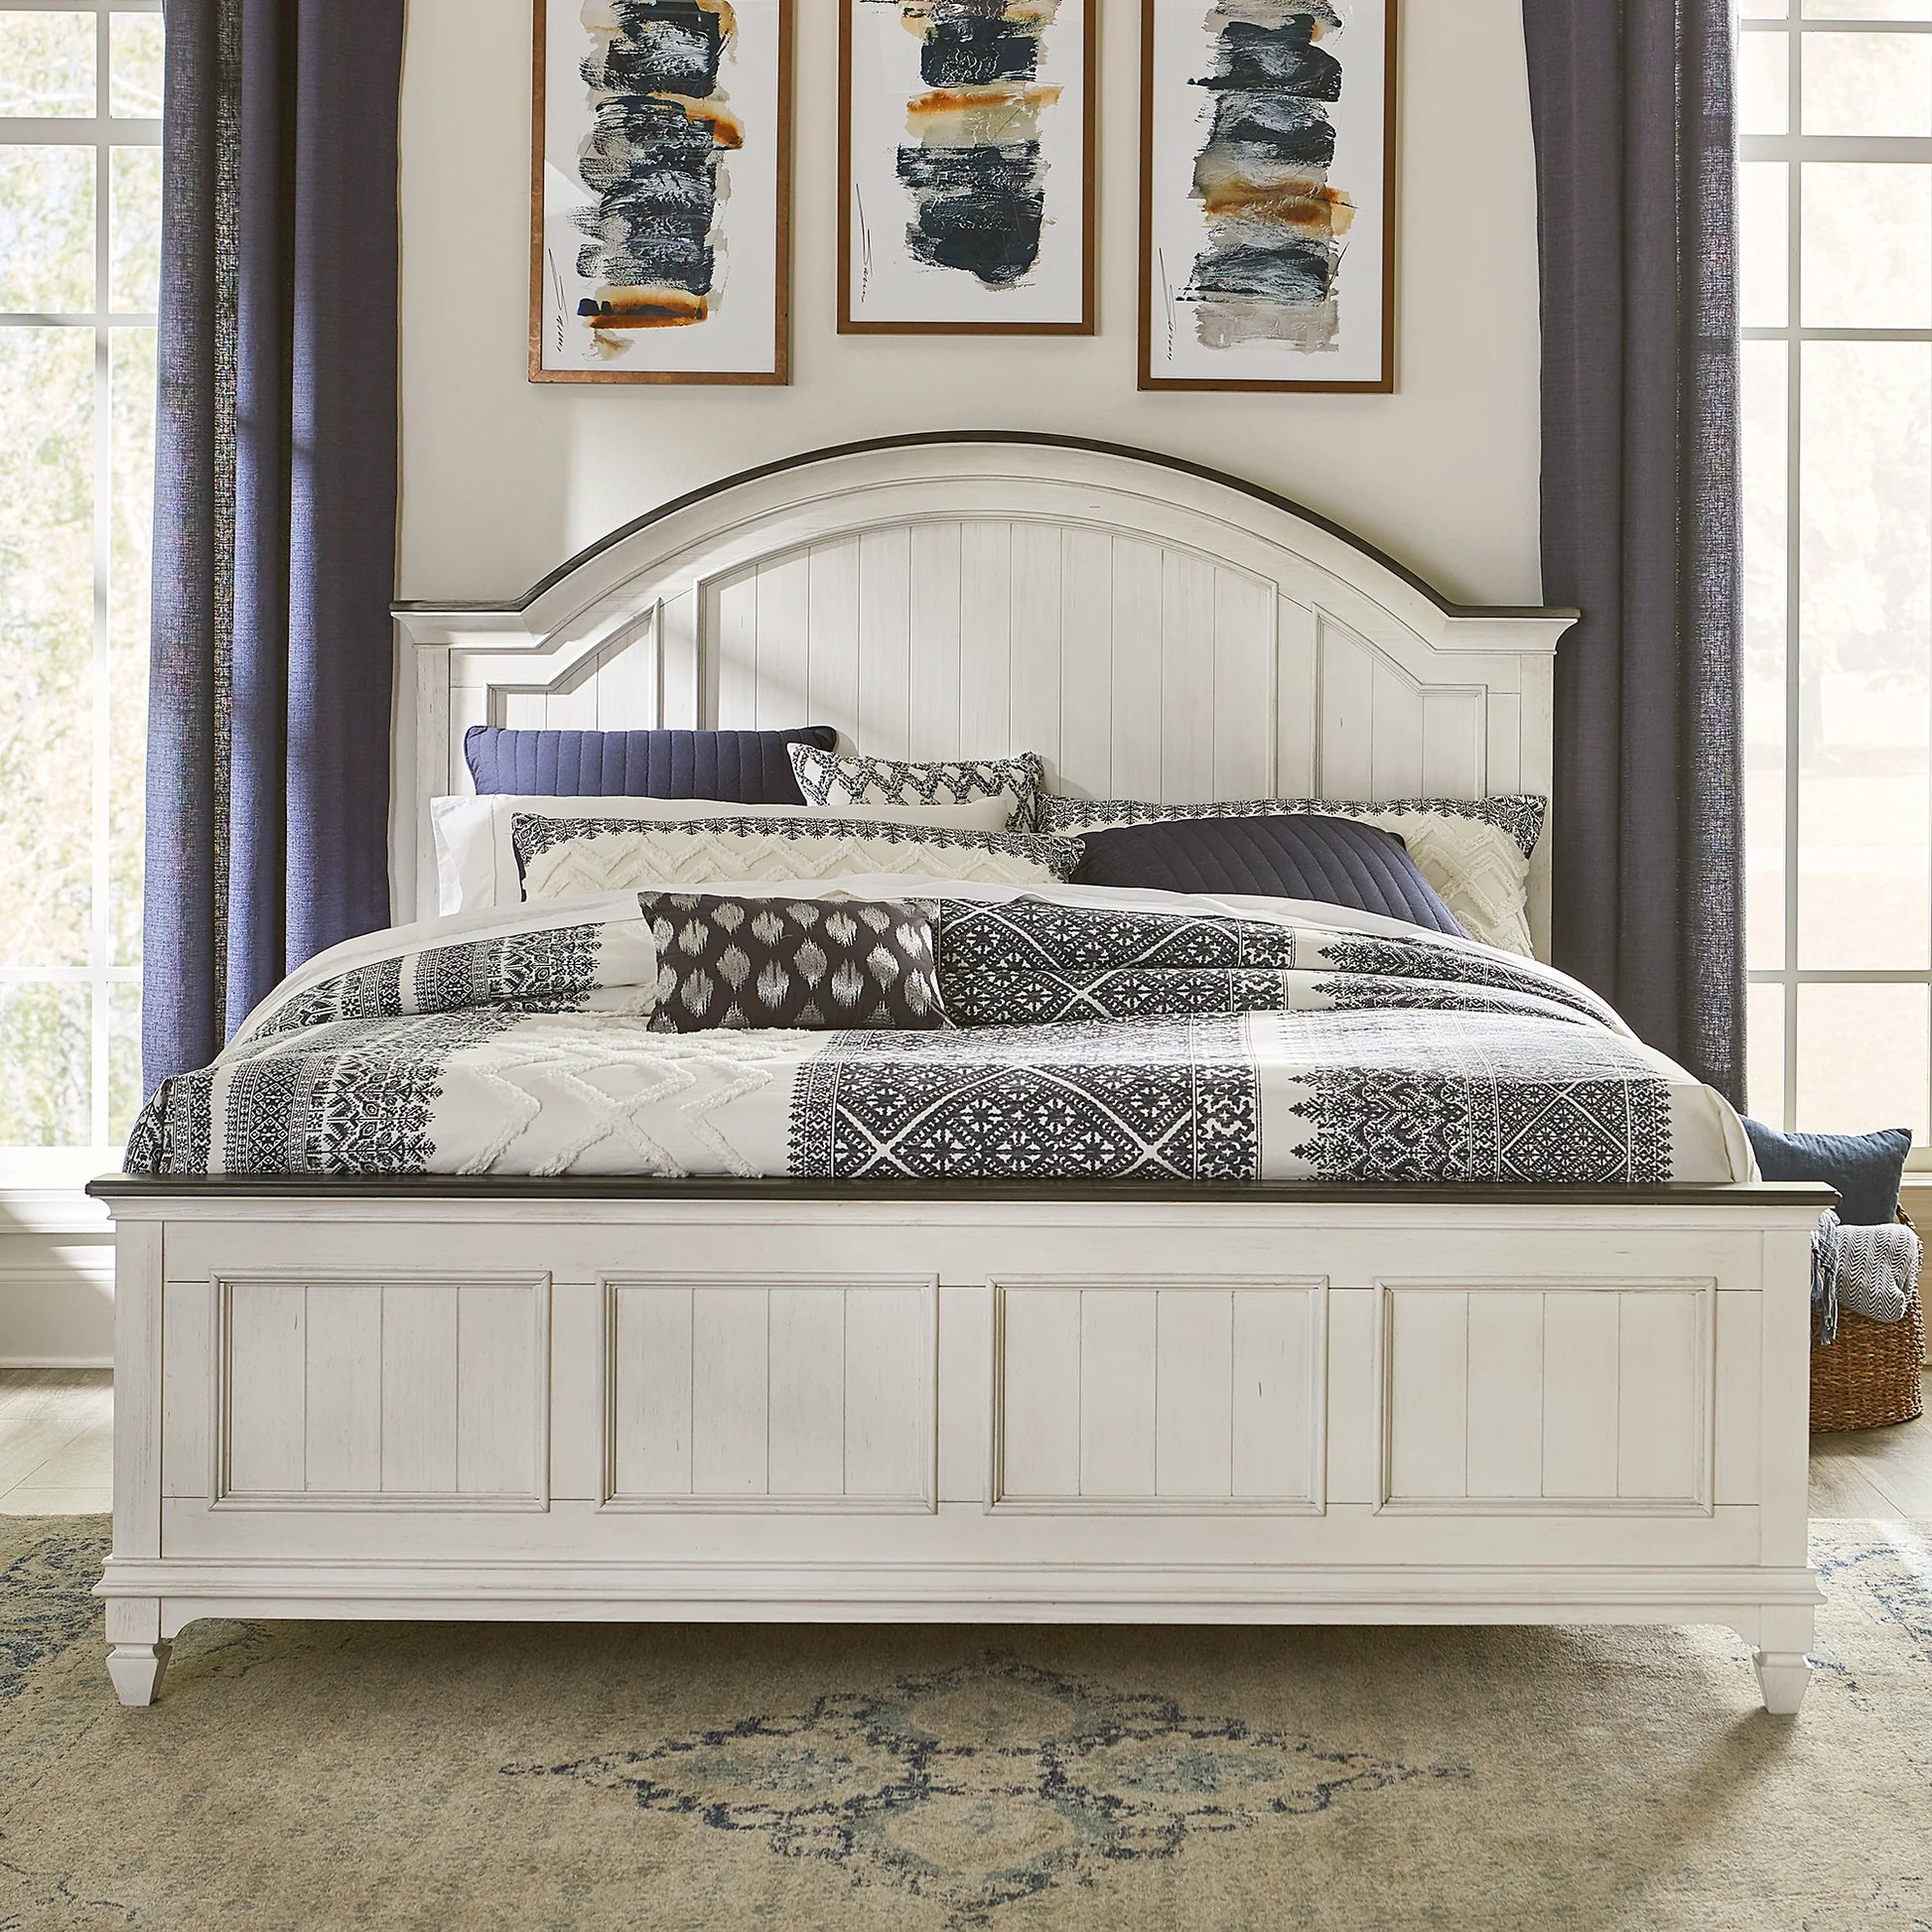 Allyson Park - King Arched Panel Bed - White